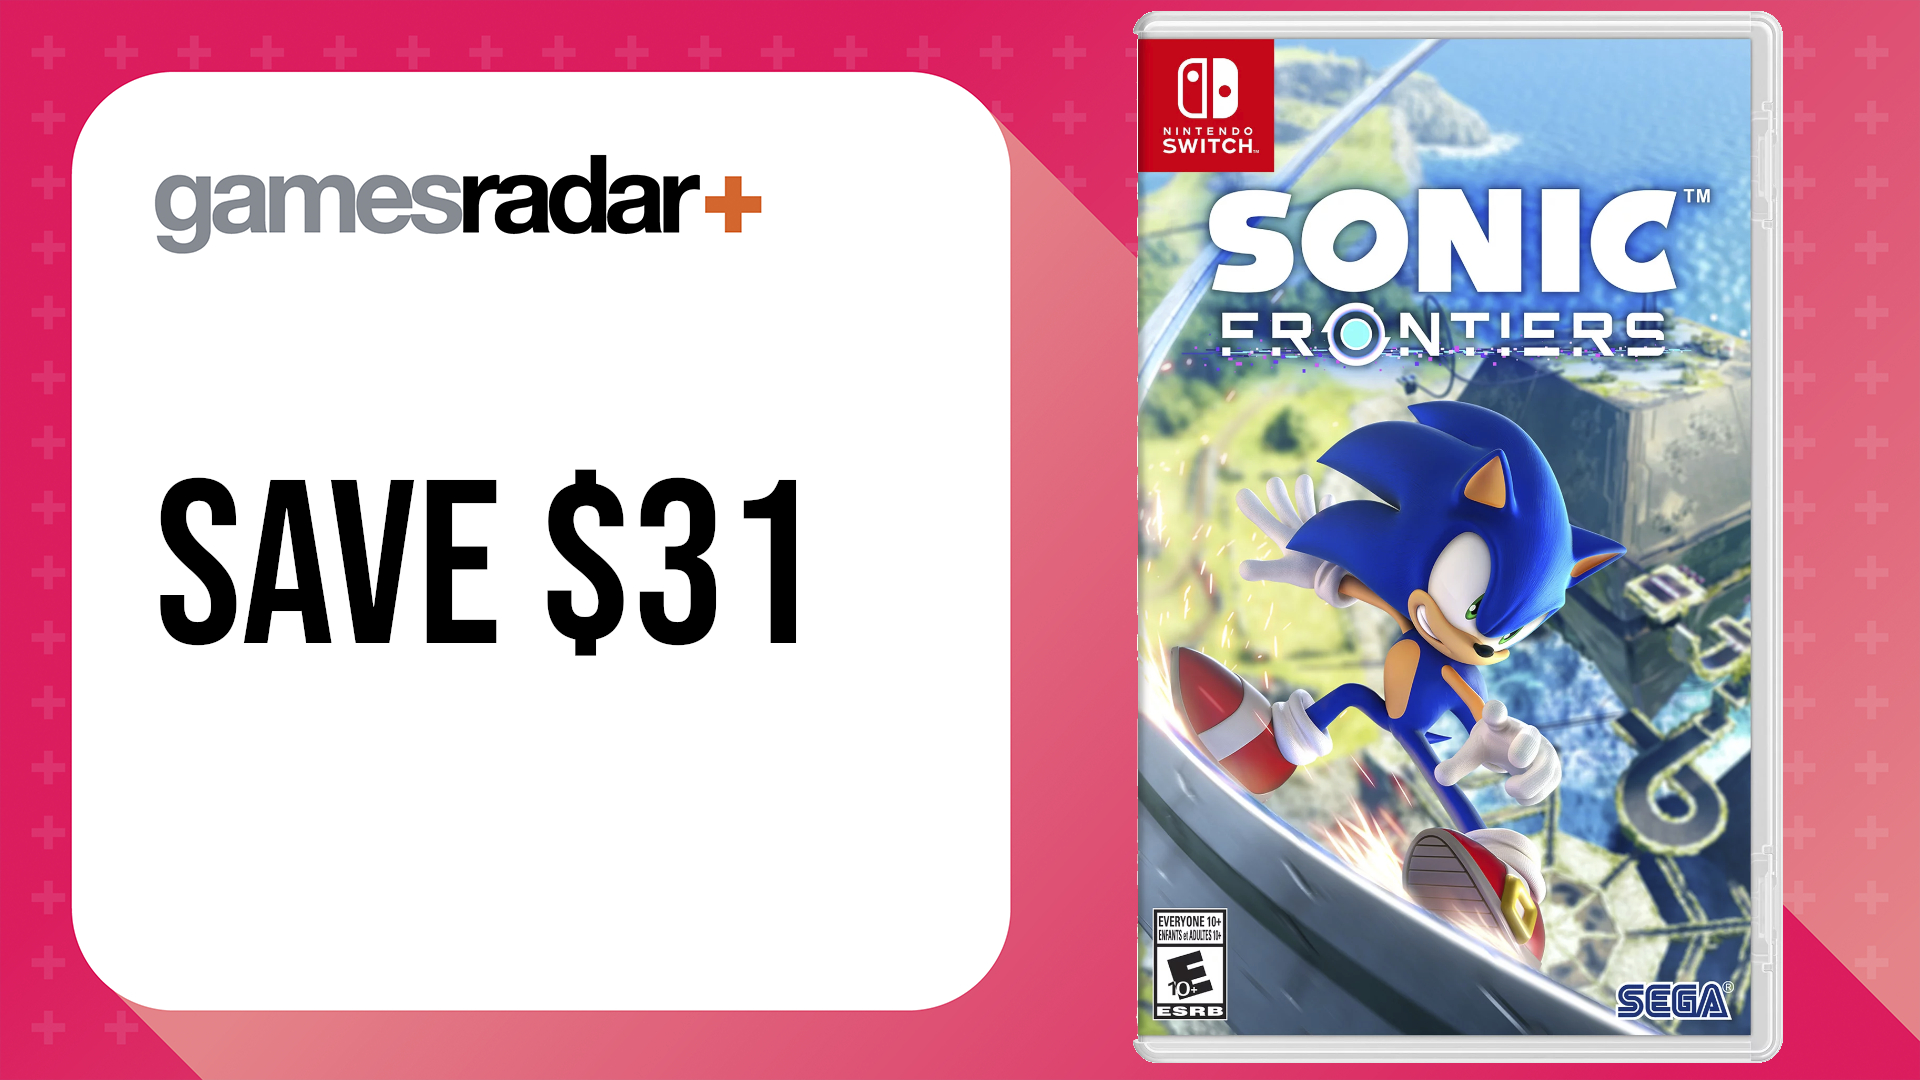 Black Friday Nintendo Switch deals with Sonic Frontiers